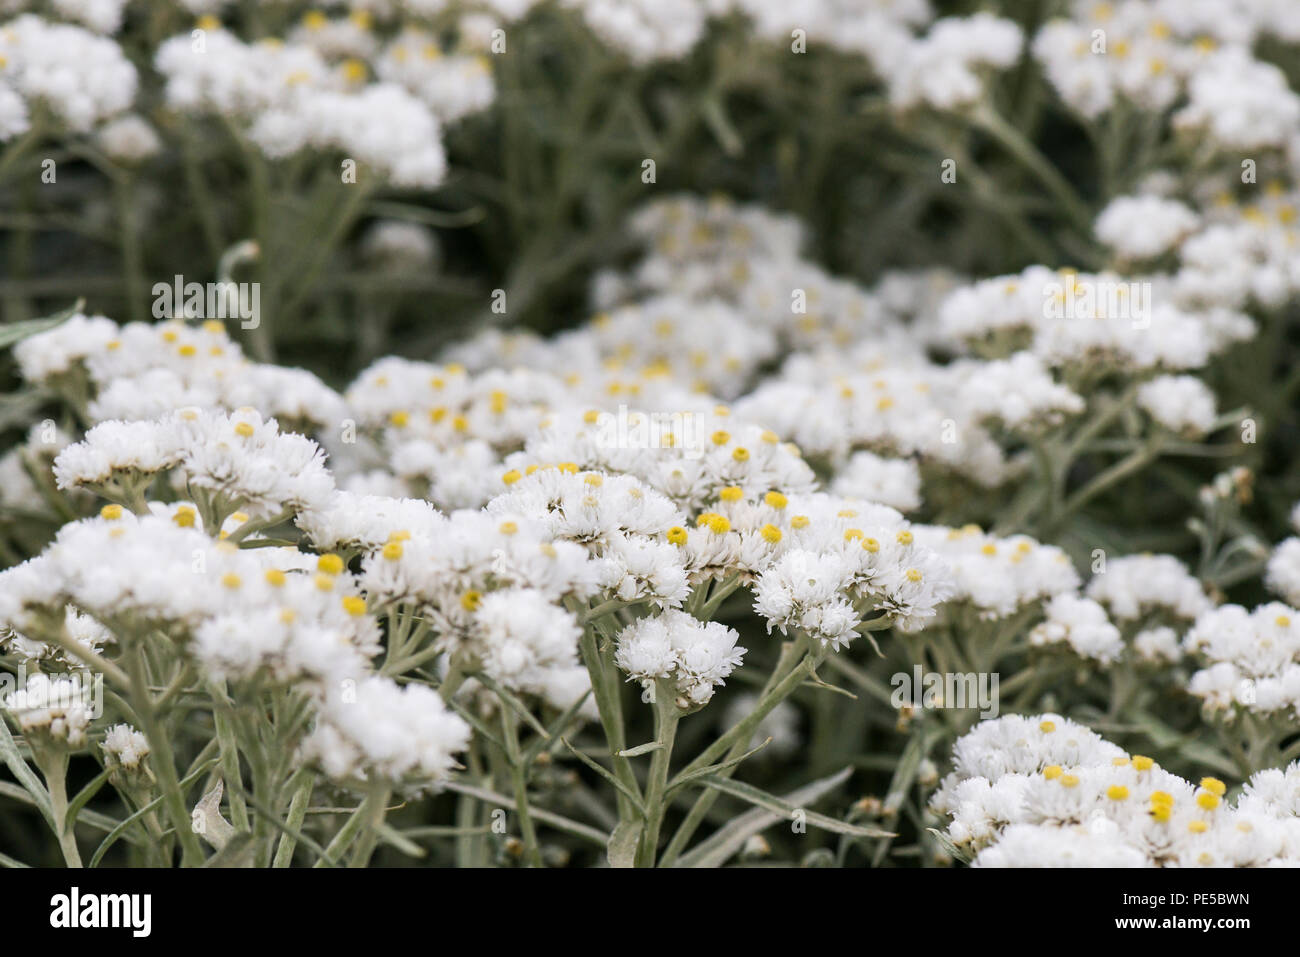 The small white flower heads of a triple-nerved pearly everlasting (Anaphalis triplinervis) Stock Photo